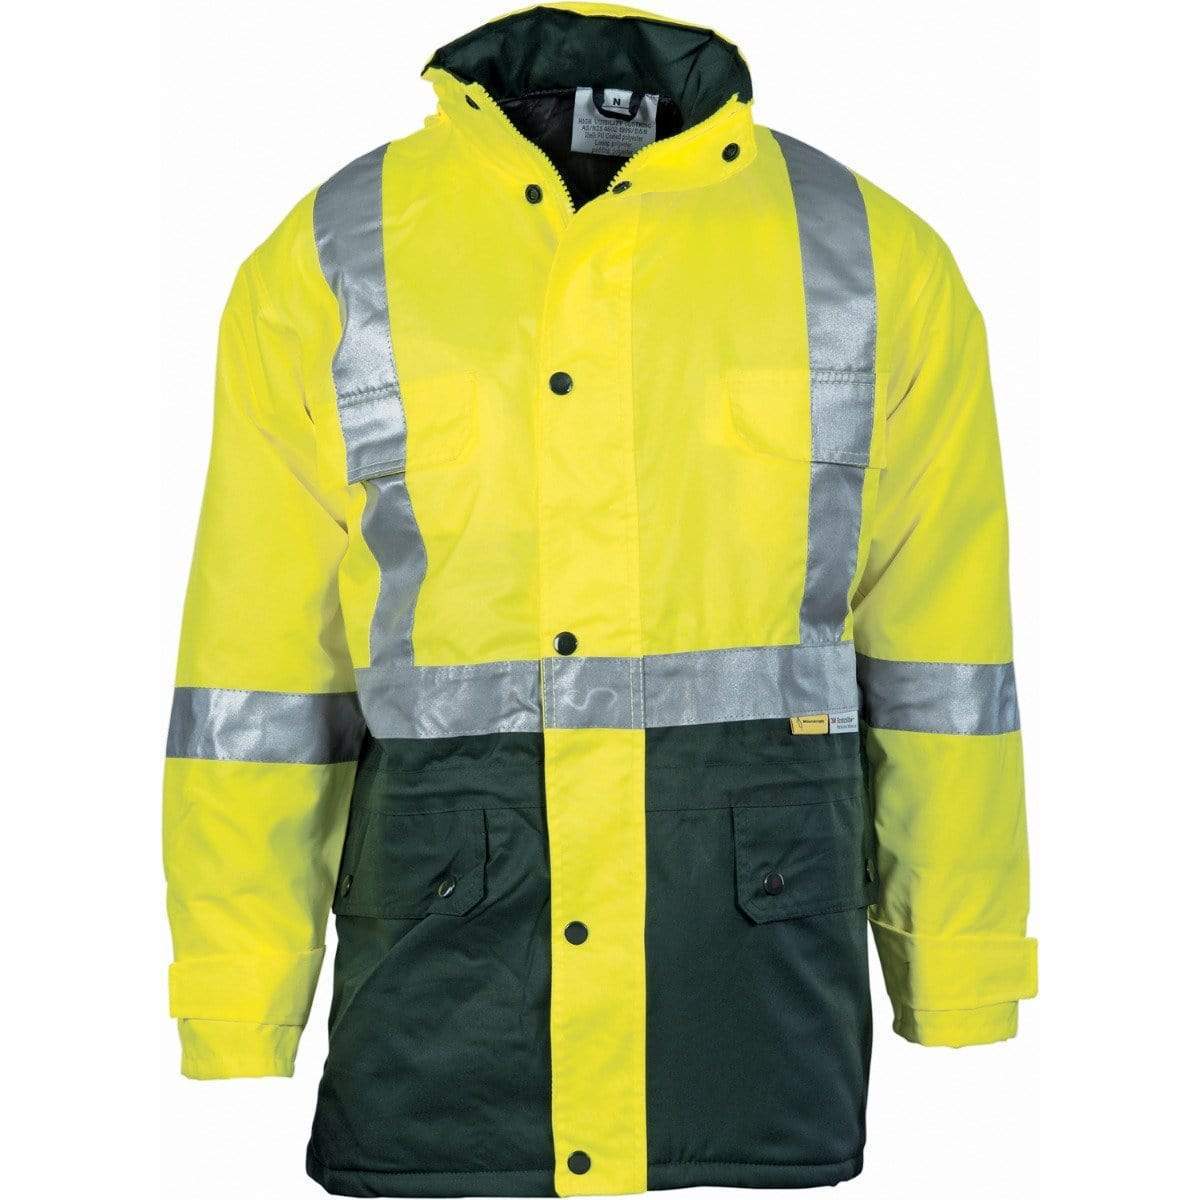 DNC Workwear Work Wear Yellow/Bottle Green / S DNC WORKWEAR Hi-Vis Two-Tone Quilted Jacket with 3M Reflective Tape 3863